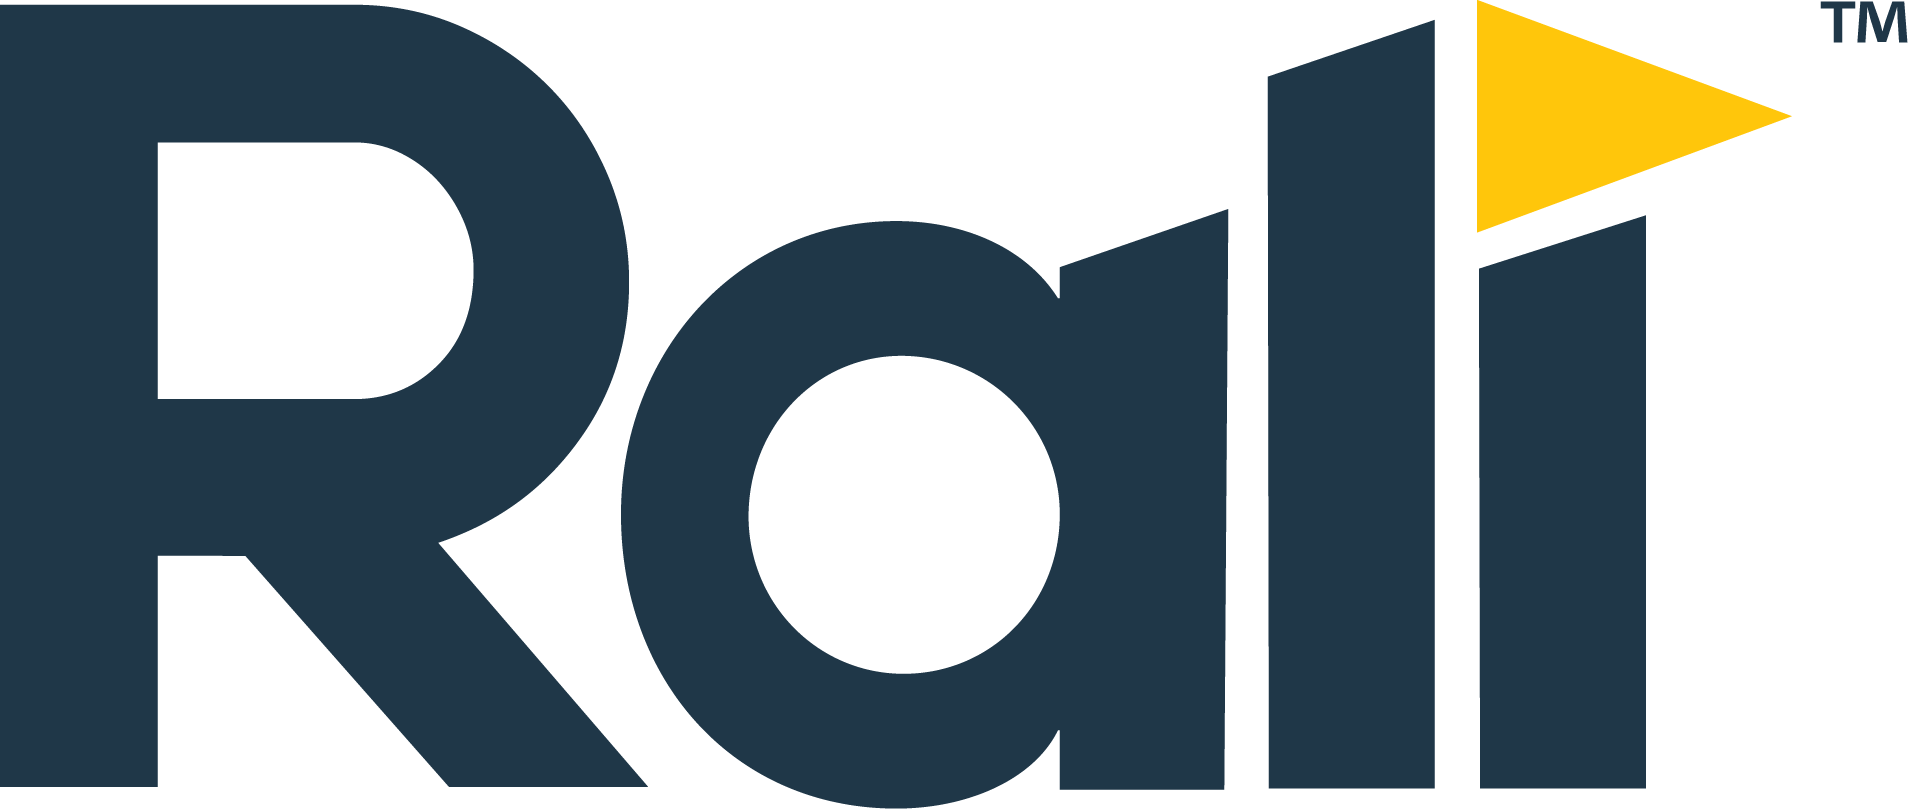 Rali's integration with Zoom extends life and usefulness of recorded webinars and calls.